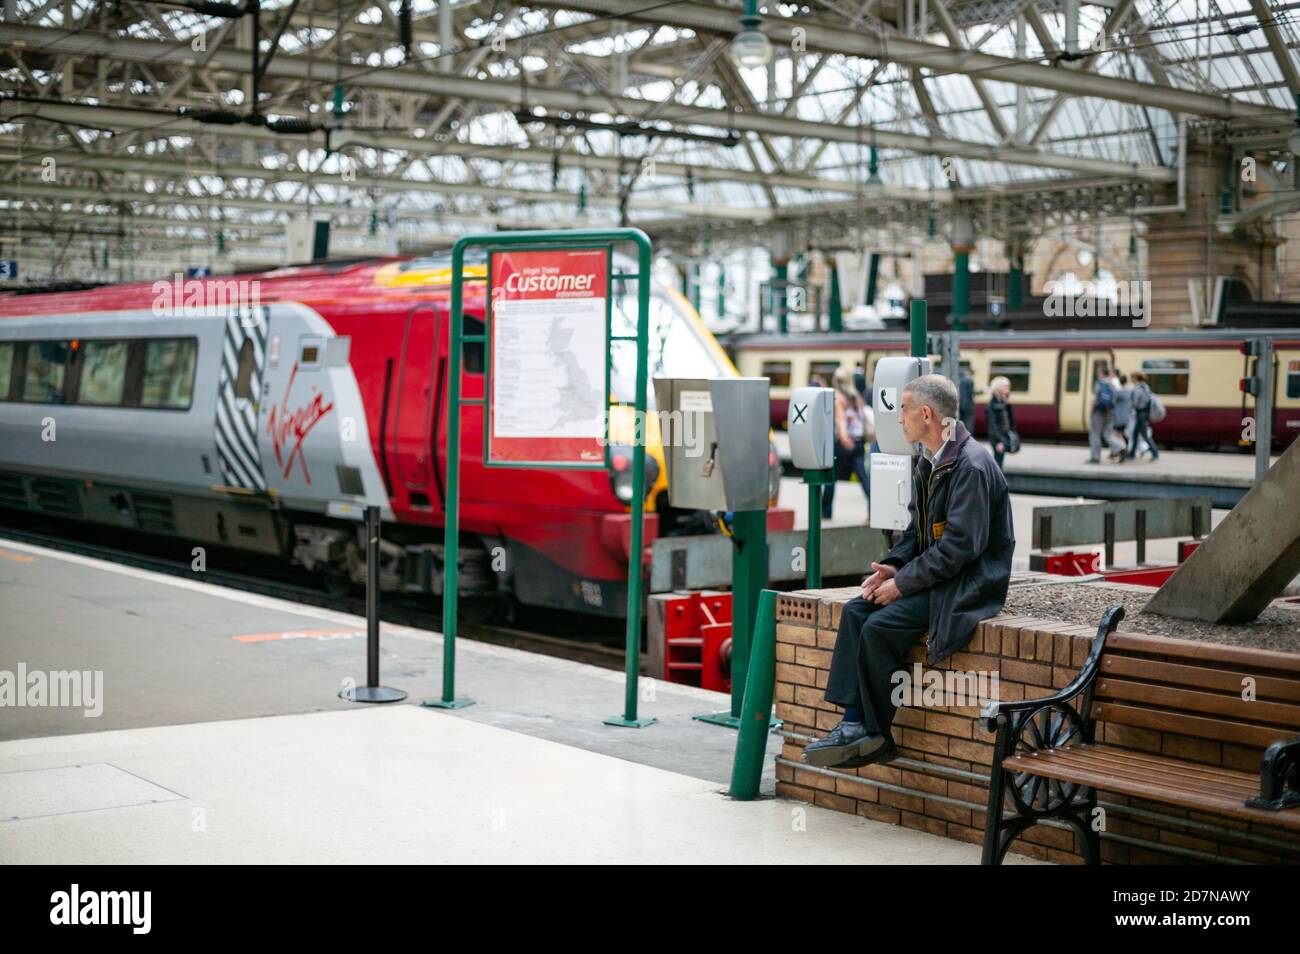 Glasgow Central Station July 2010. A man sits on a wall after passengers have boarded the train, appearing to think or ponder. Virgin trains. Street. Stock Photo